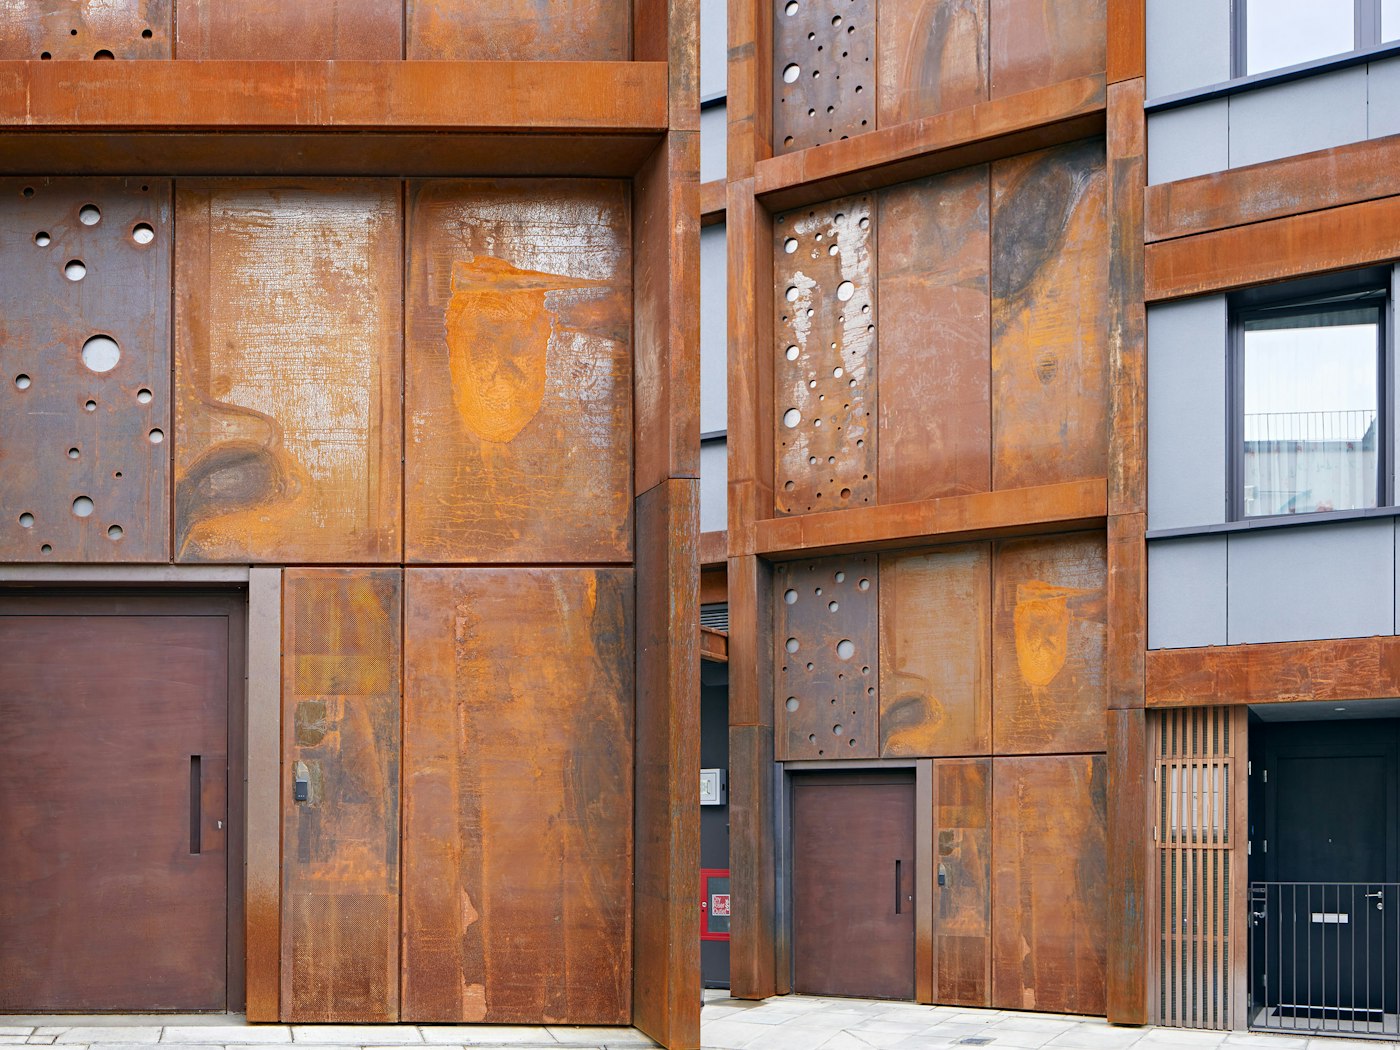 This large steel door fits perfectly with the mixed industrial aesthetic of the building